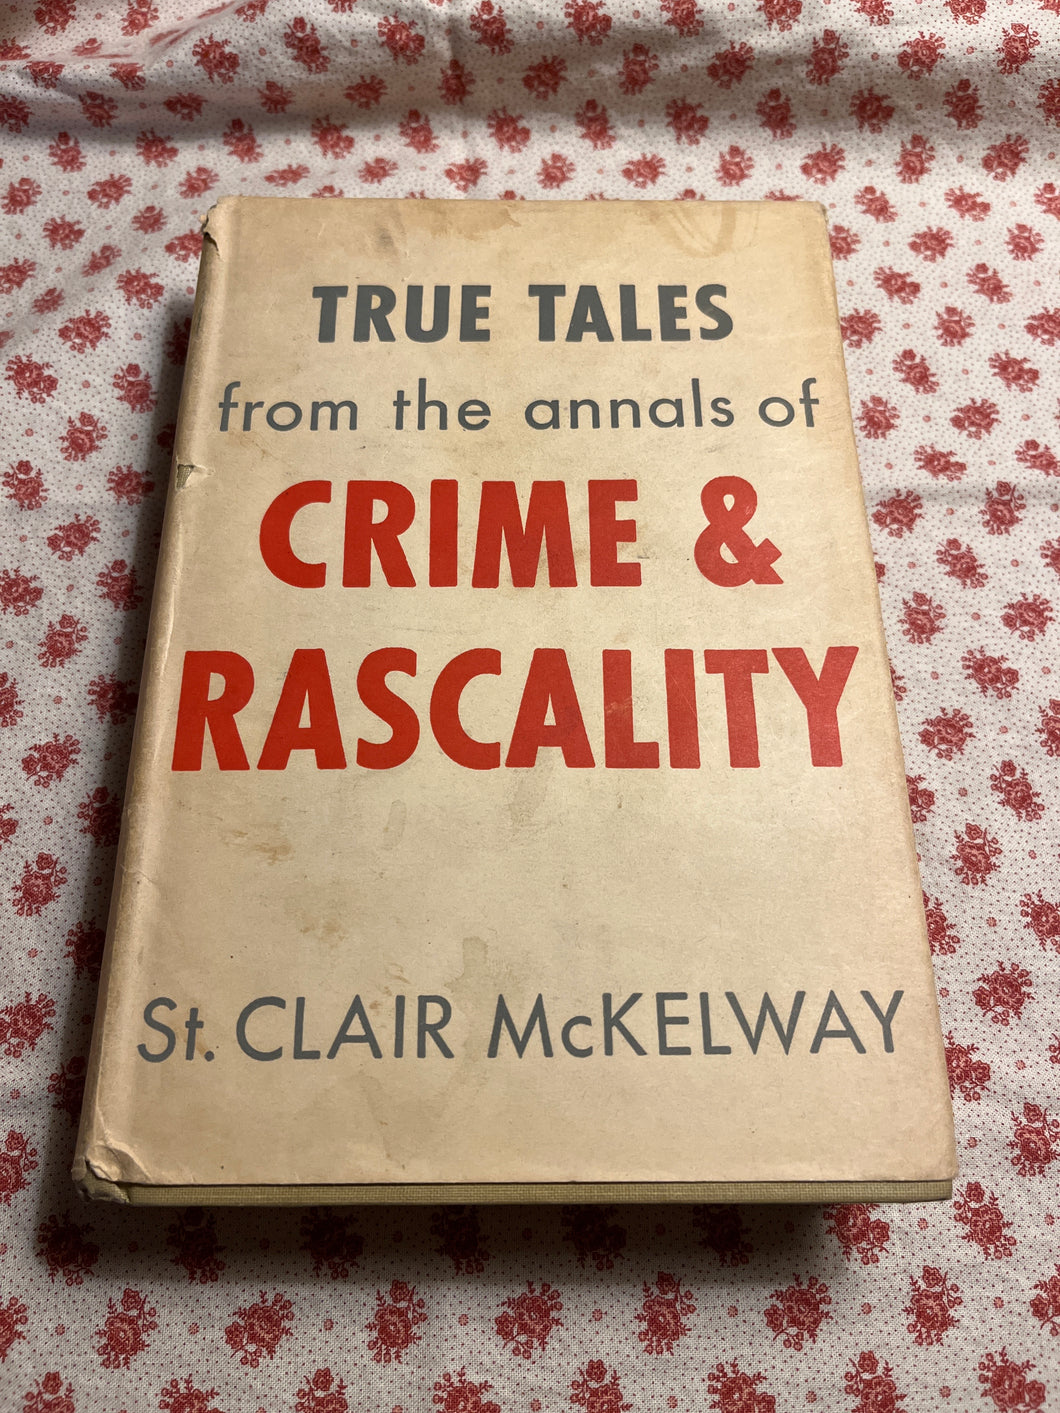 True Tales from the Annals of Crime & Rascality